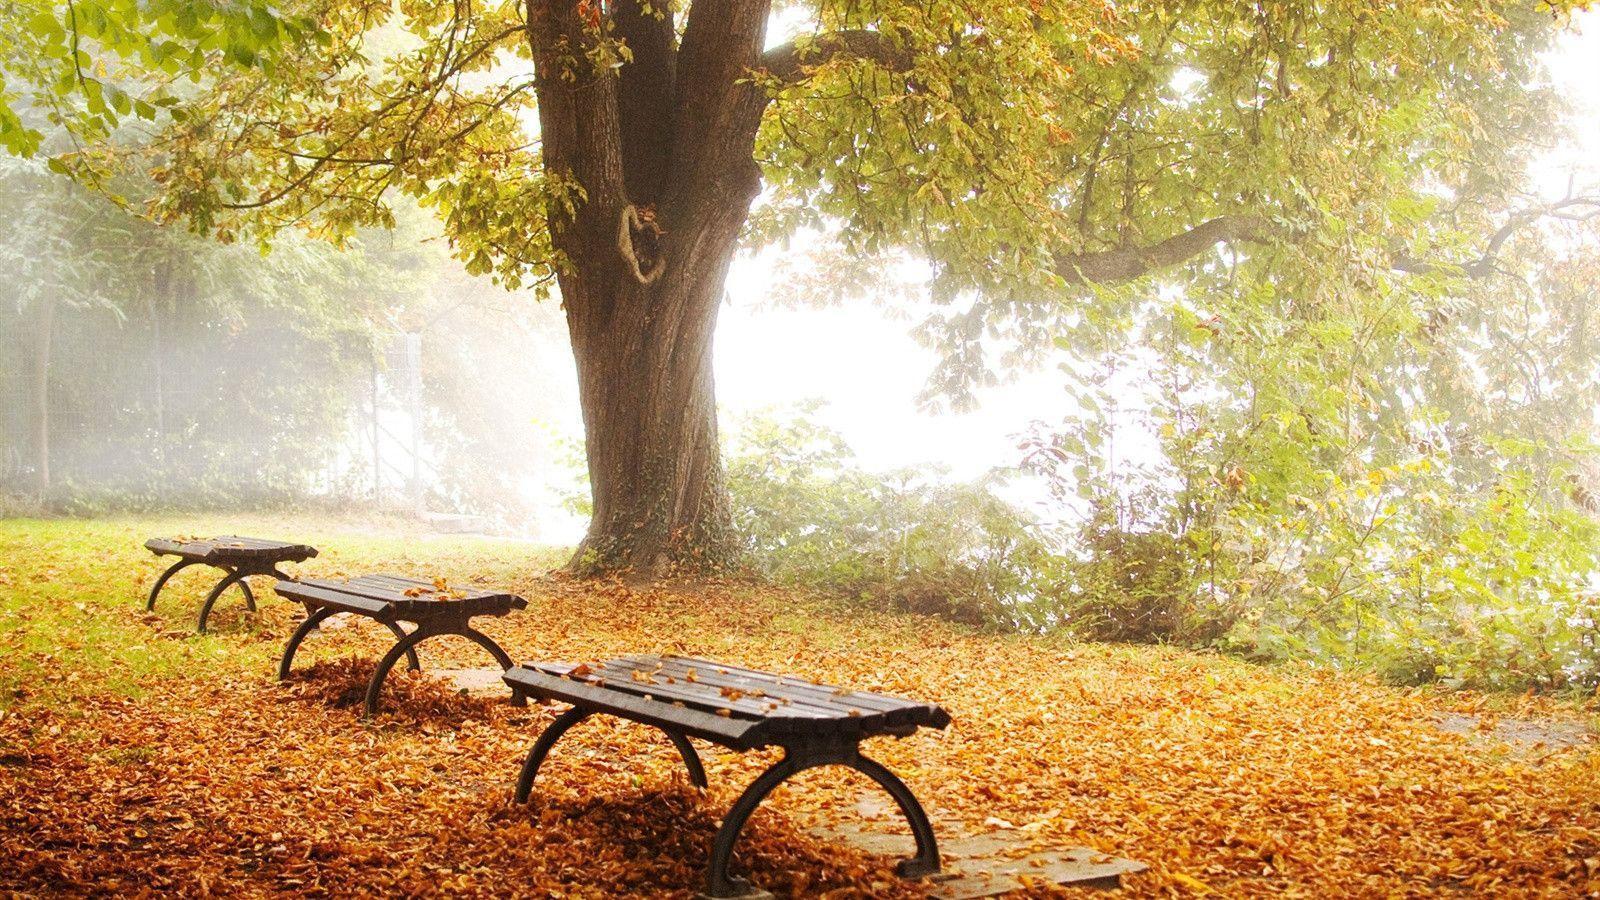 Bench Foggy Nature Wallpaper, Image & Picture. Download HD